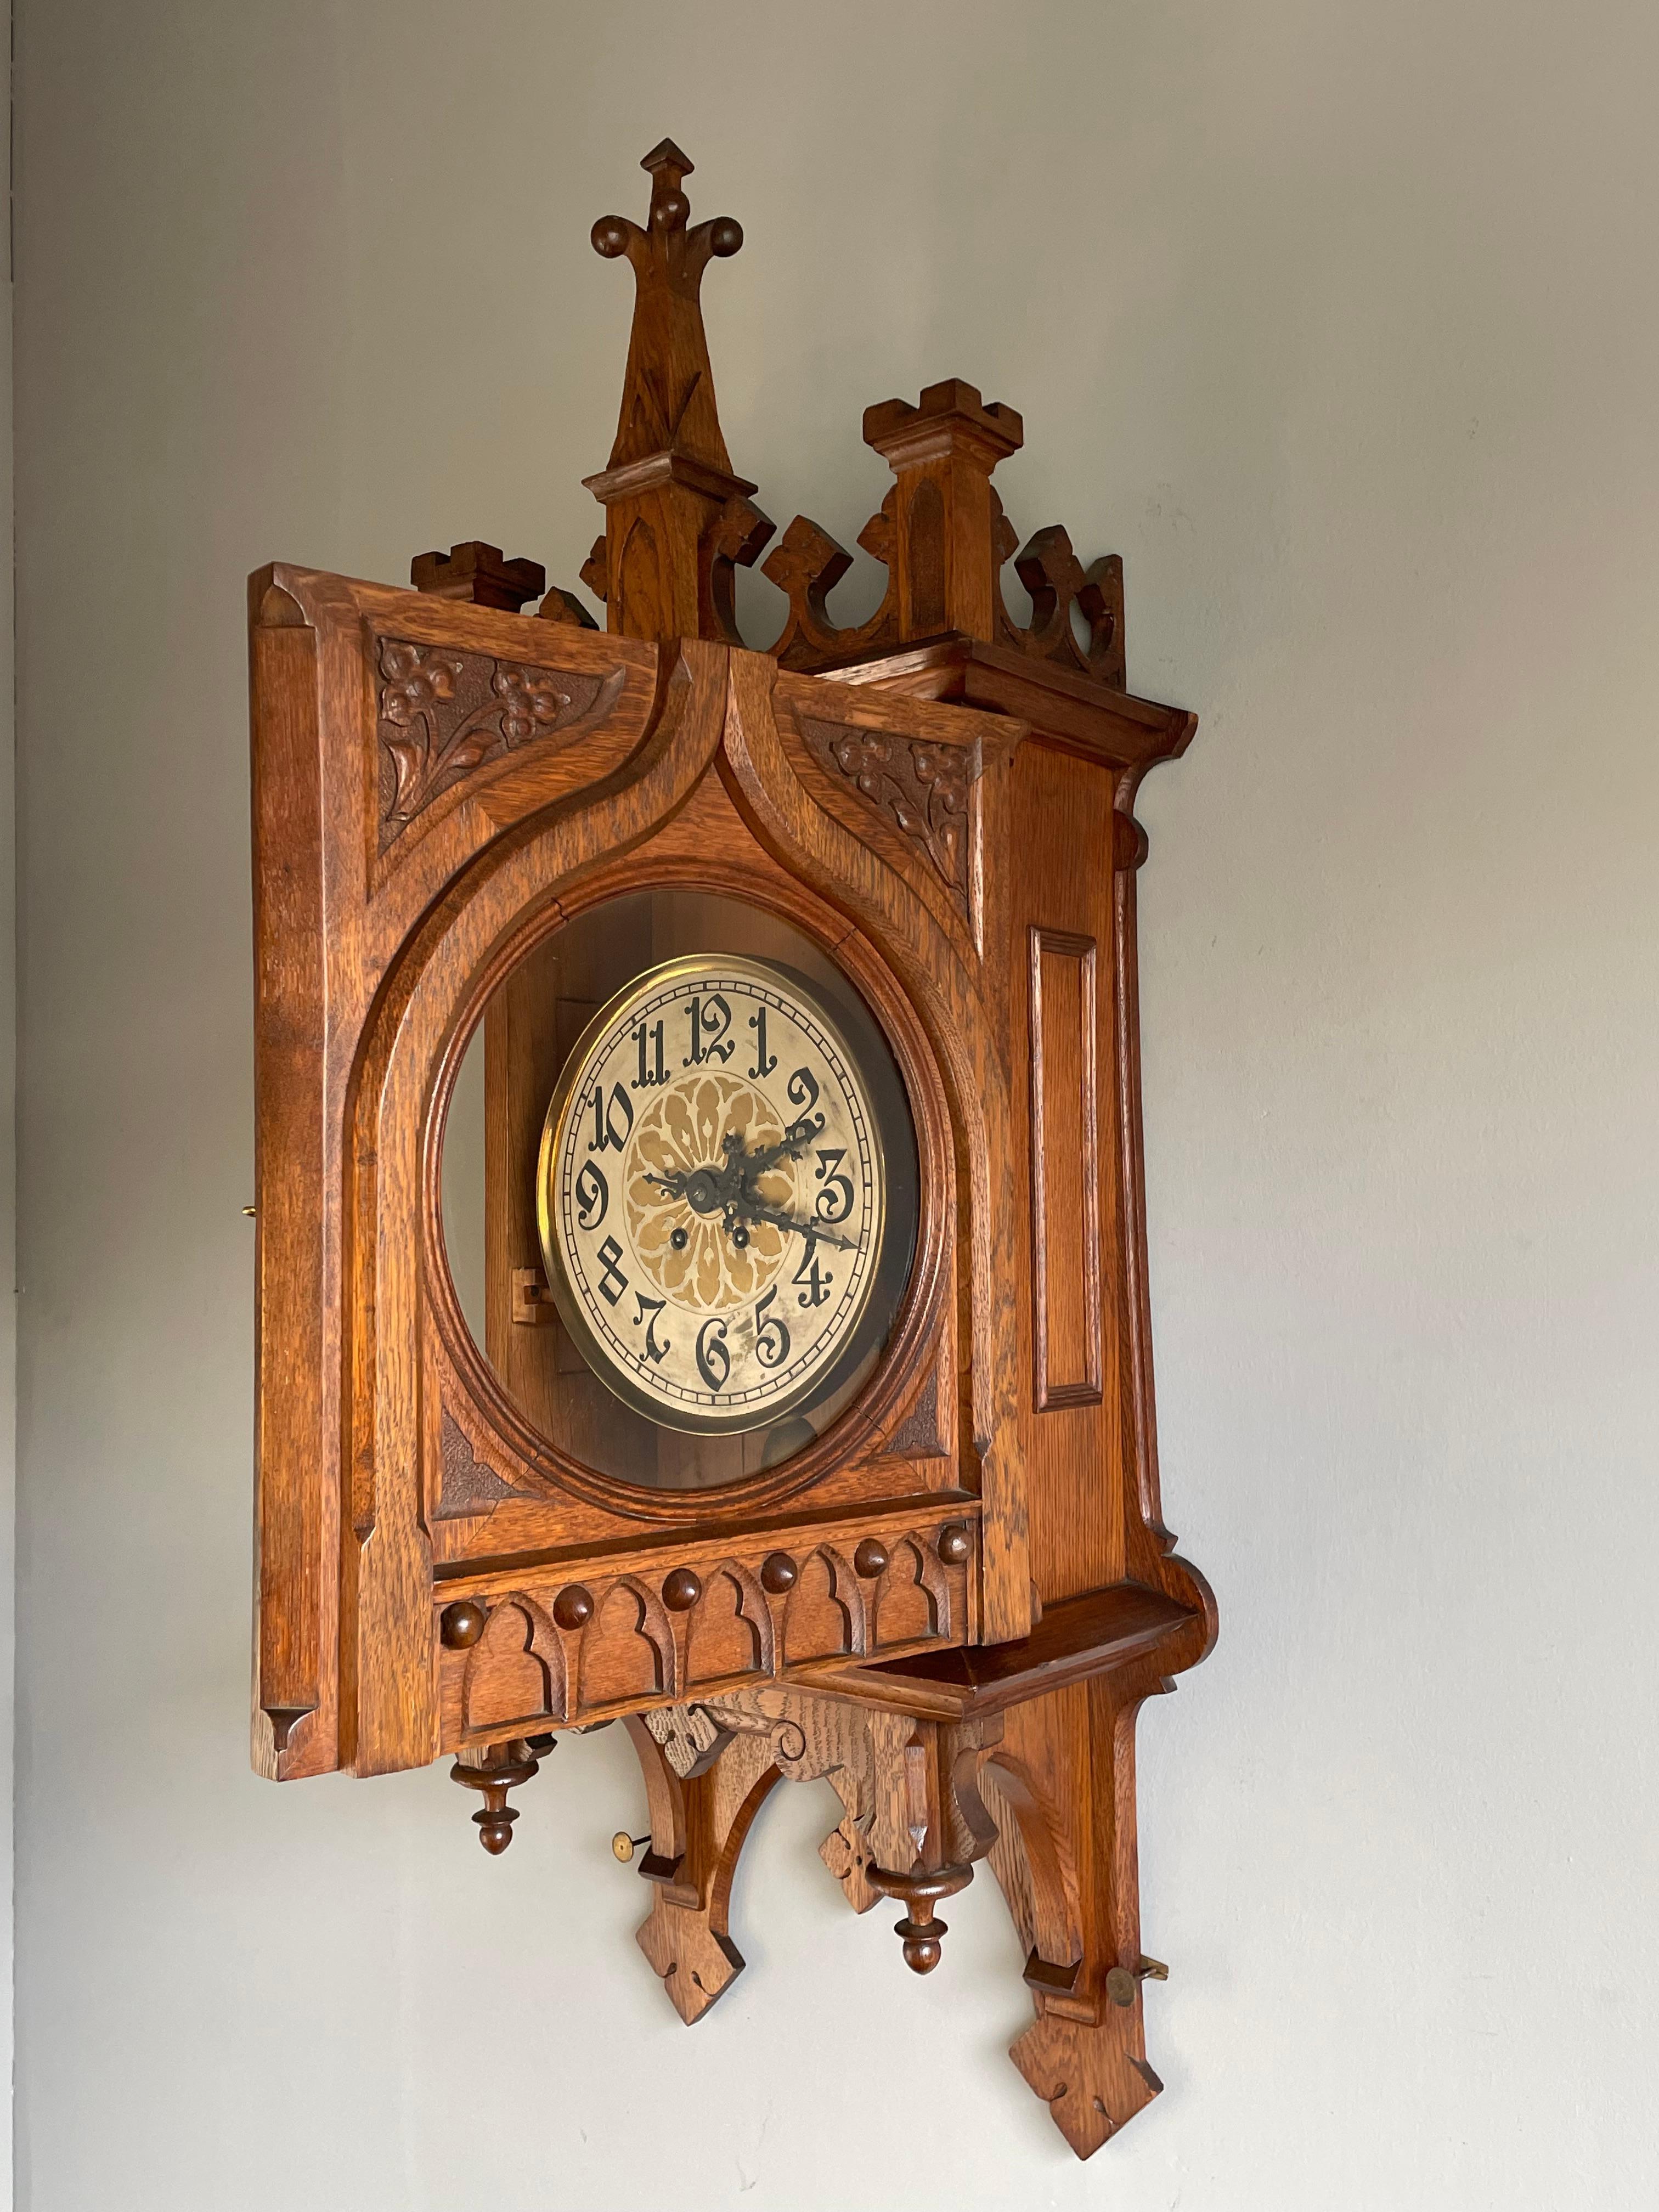 Rare & Large Antique Hand Carved Gothic Revival Wall Clock w. Lenzkirch Movement 6